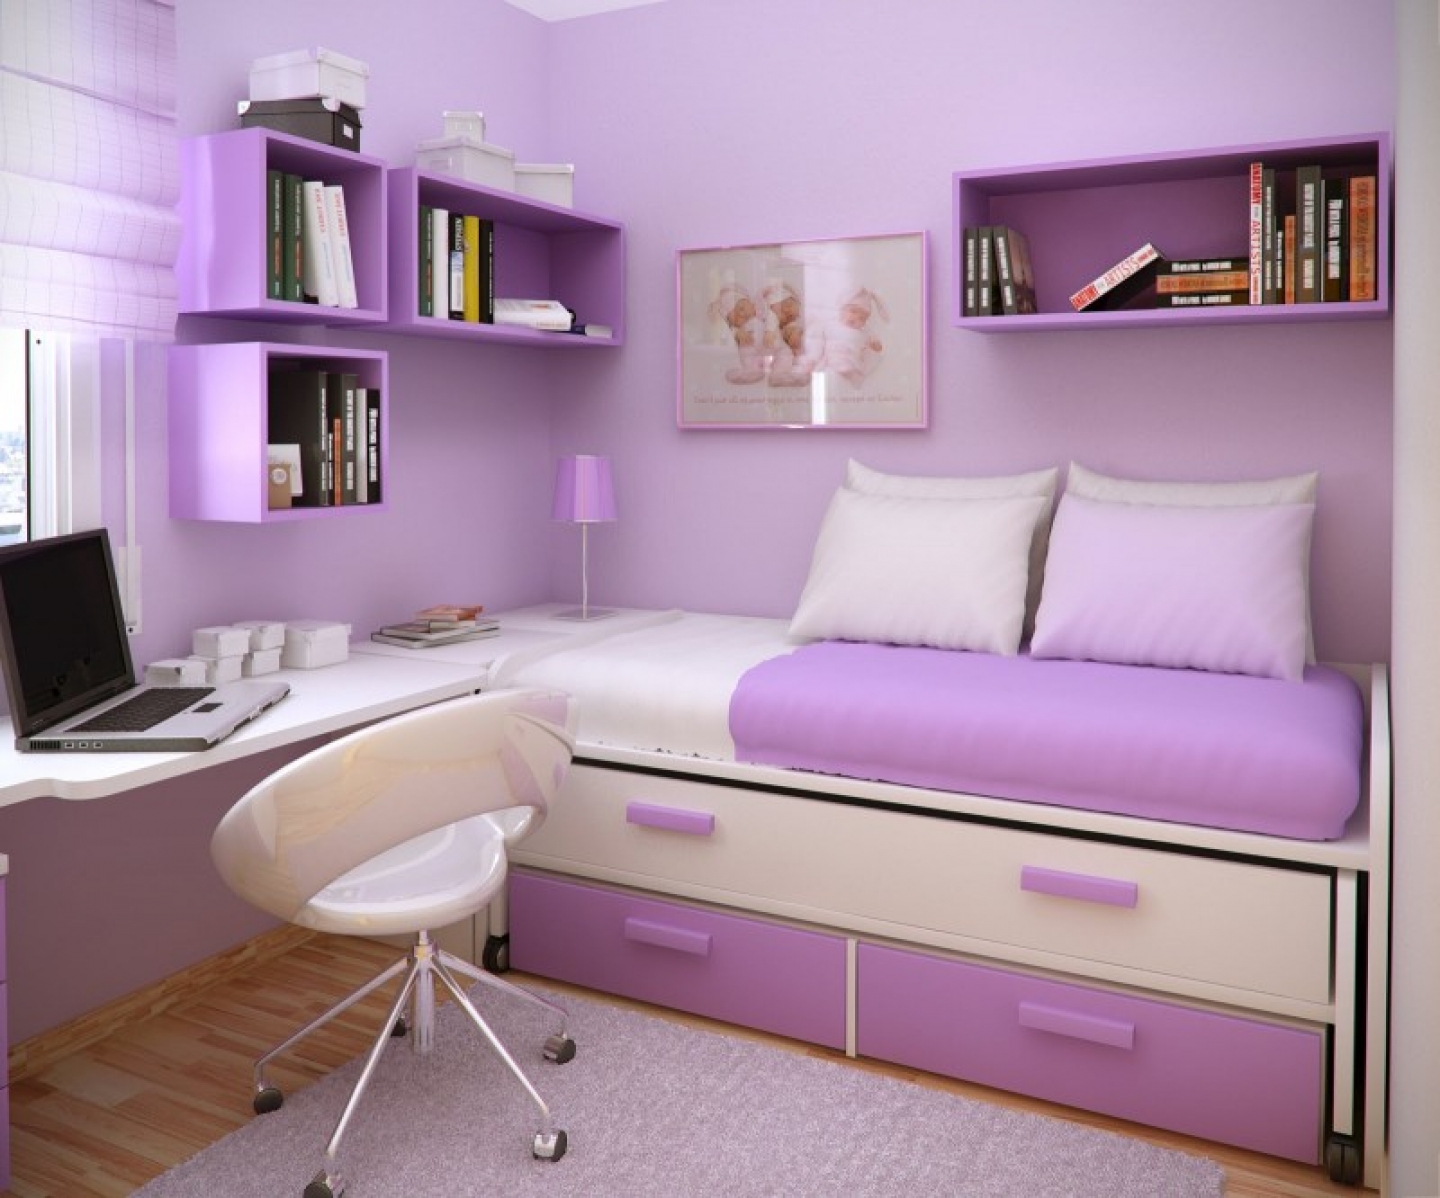 Free Download Girls Bedrooms For Teenage Girls For Girls